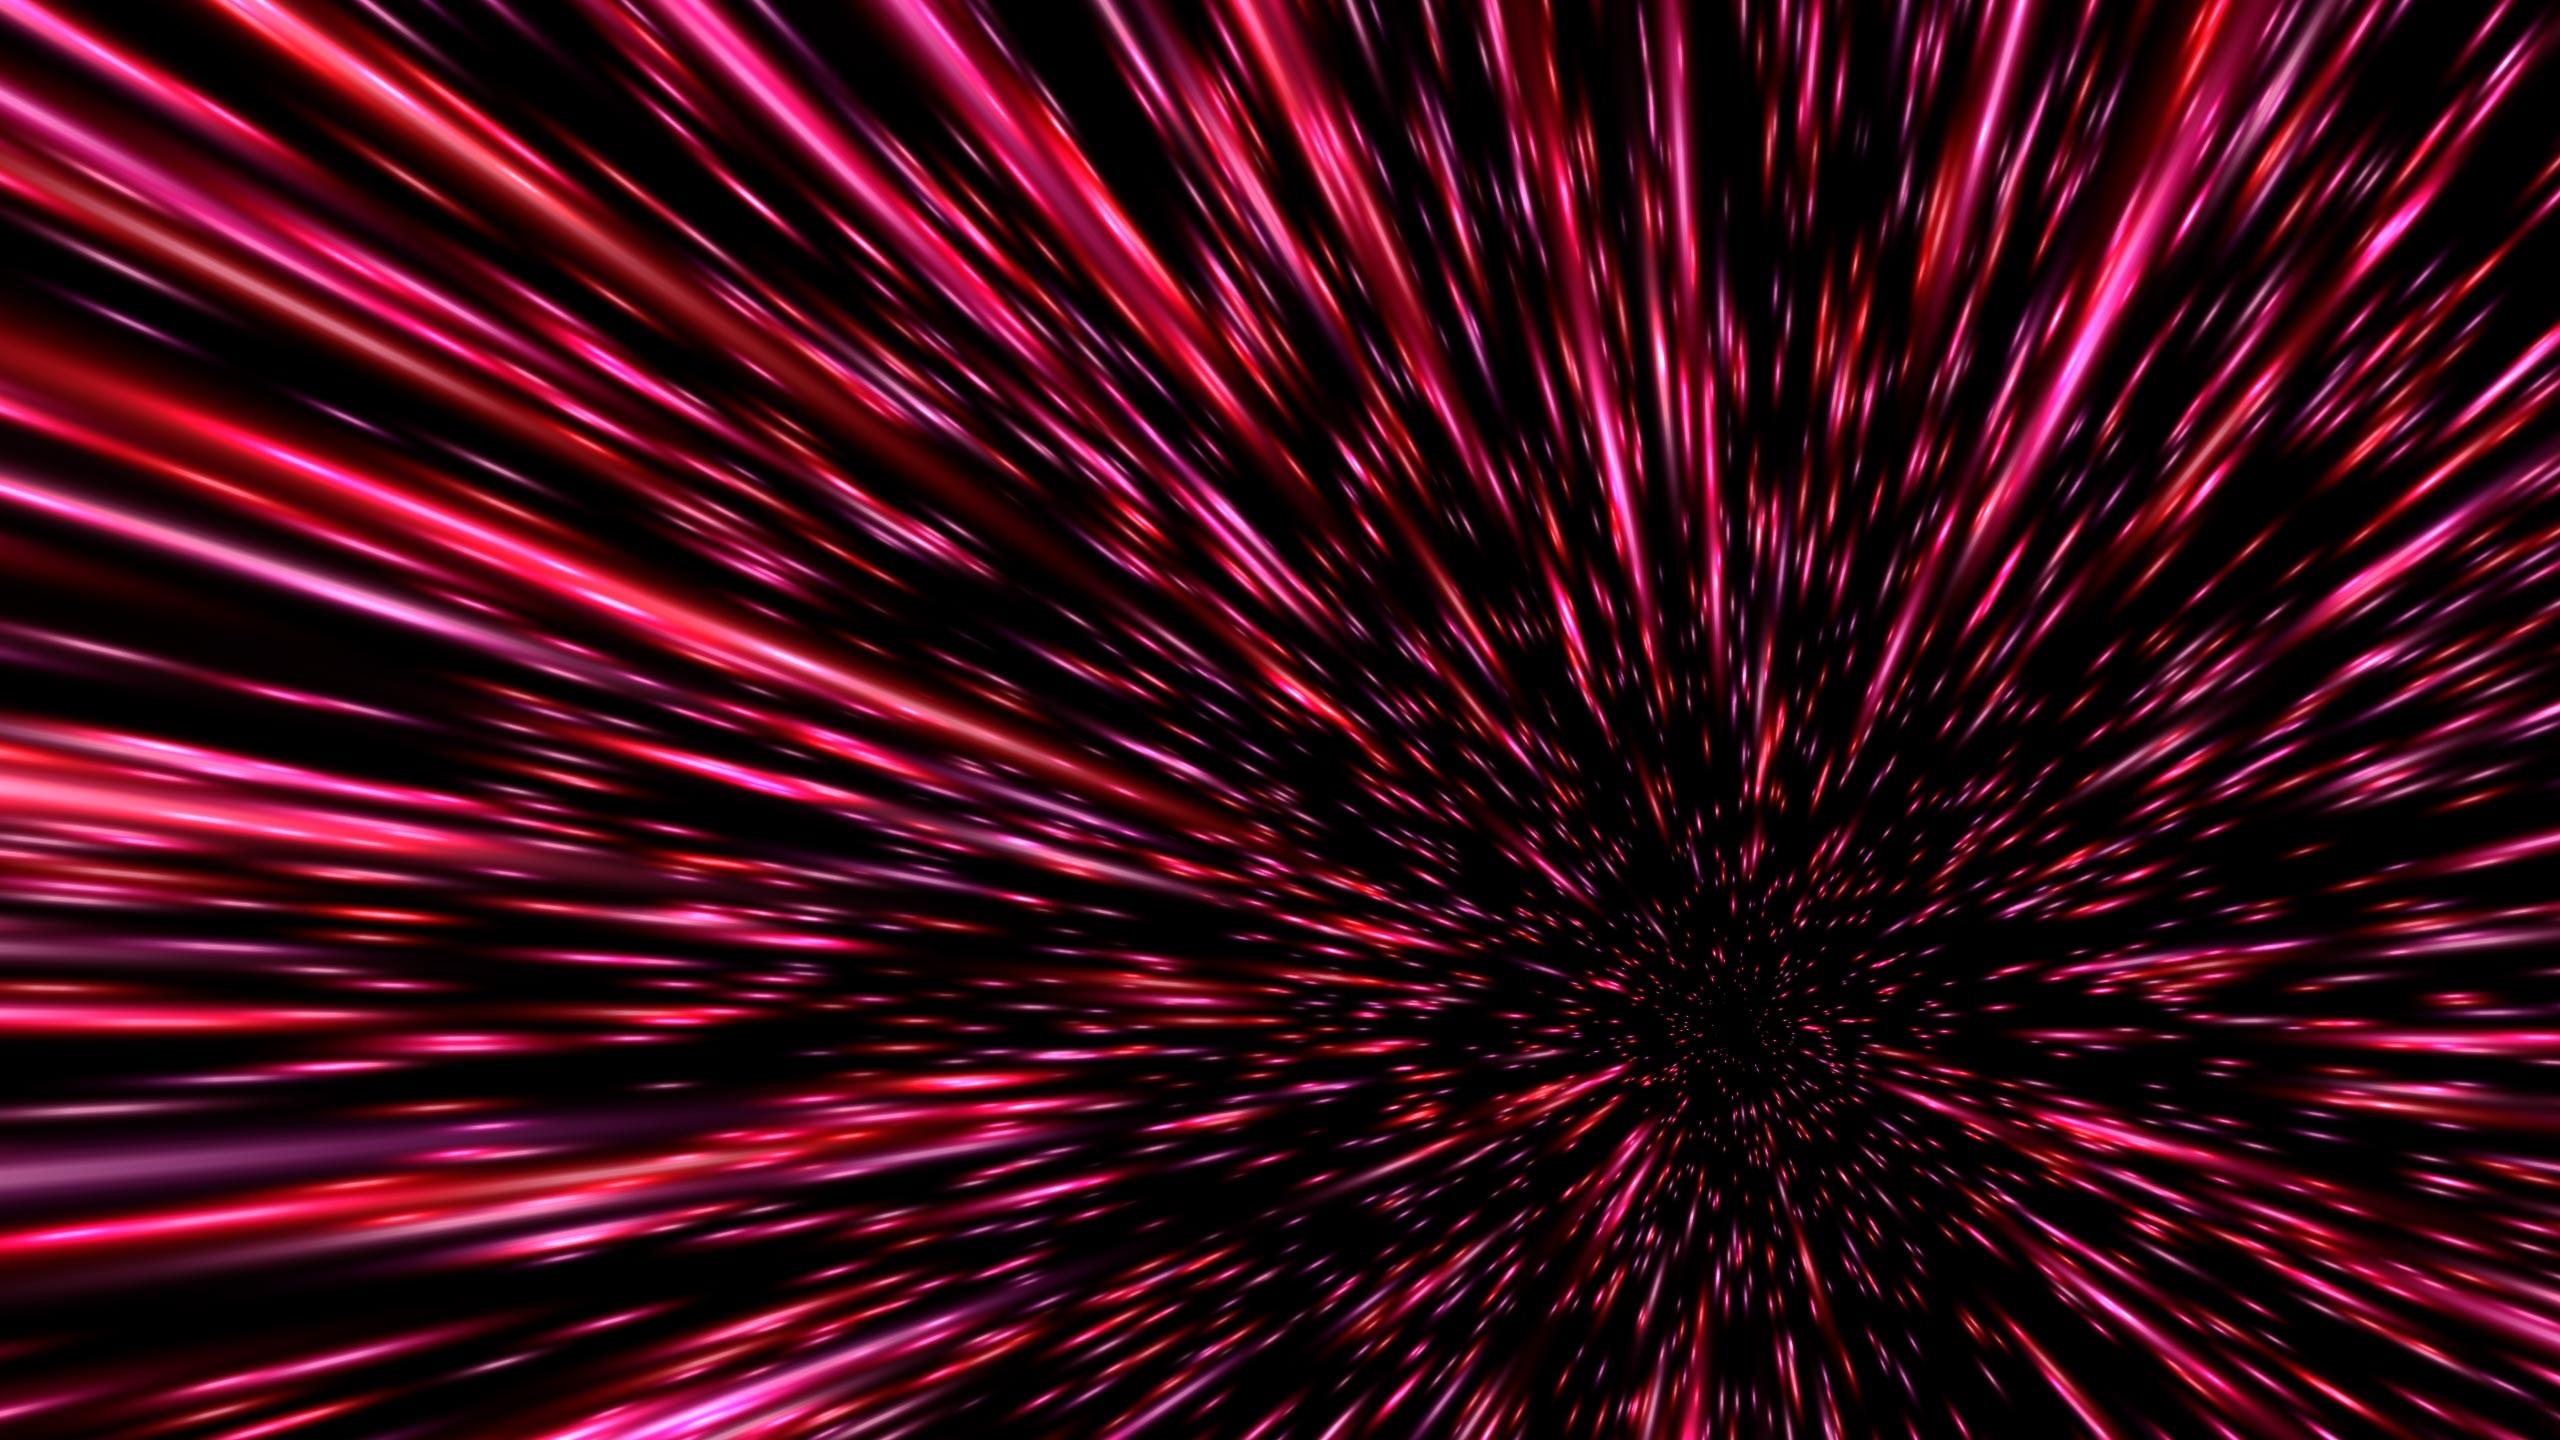 moving picture wallpaper,fireworks,pink,red,purple,midnight